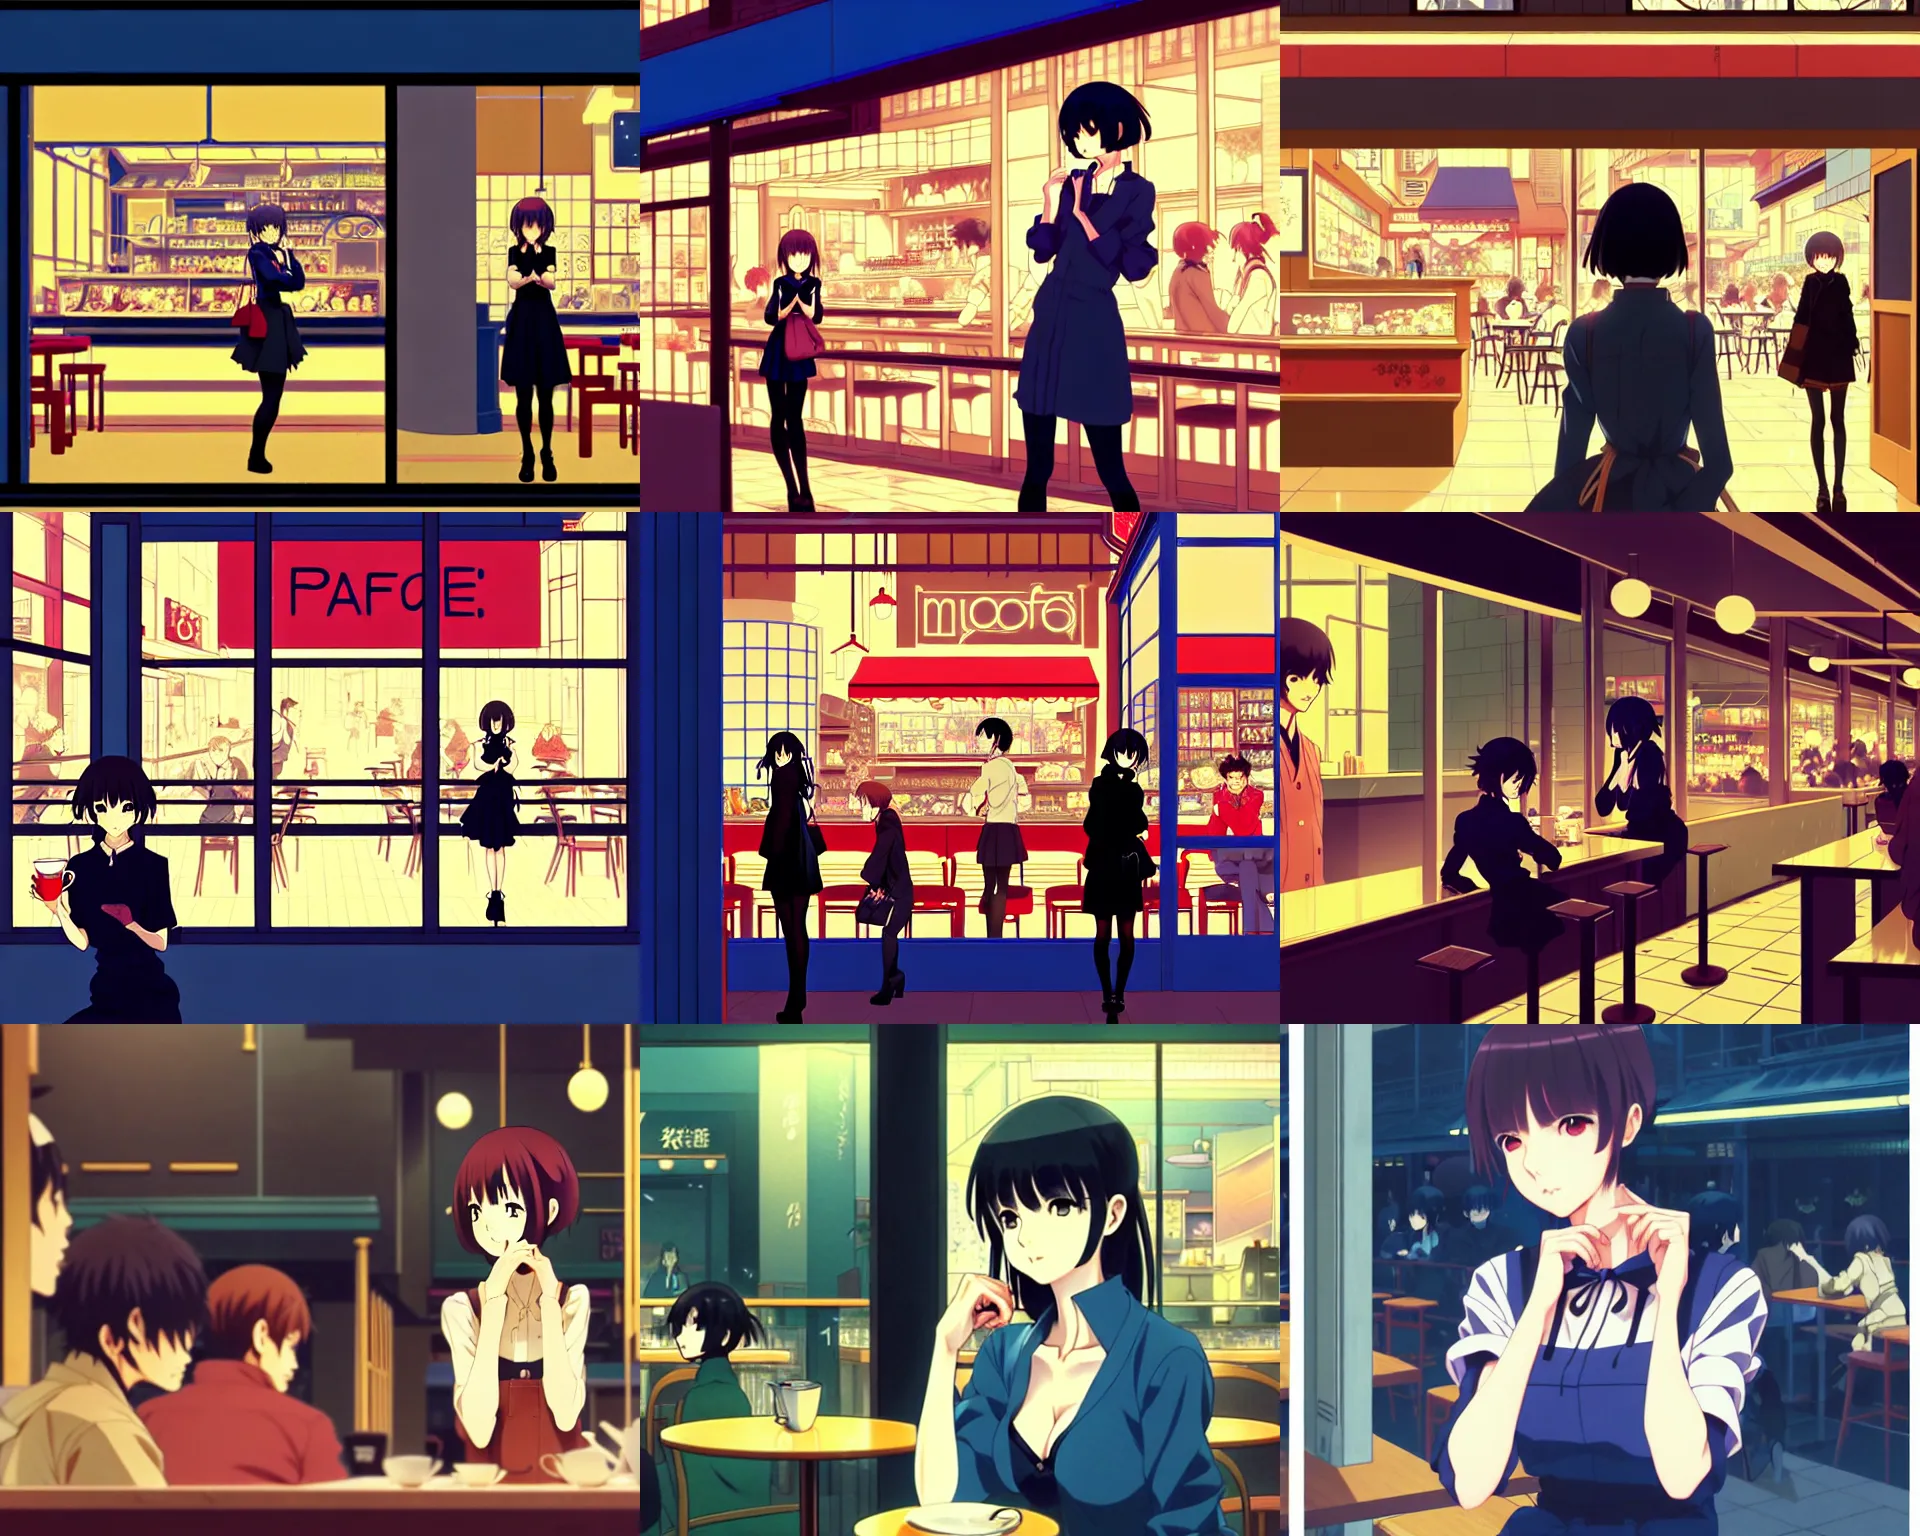 Prompt: anime frames, anime visual, portrait of a young woman visiting a busy cafe interior at night shopping, very low light cute face by ilya kuvshinov and yoh yoshinari, katsura masakazu, mucha, dynamic pose, dynamic perspective, strong silhouette, anime cels, rounded eyes, blue tint, contrasting shadows